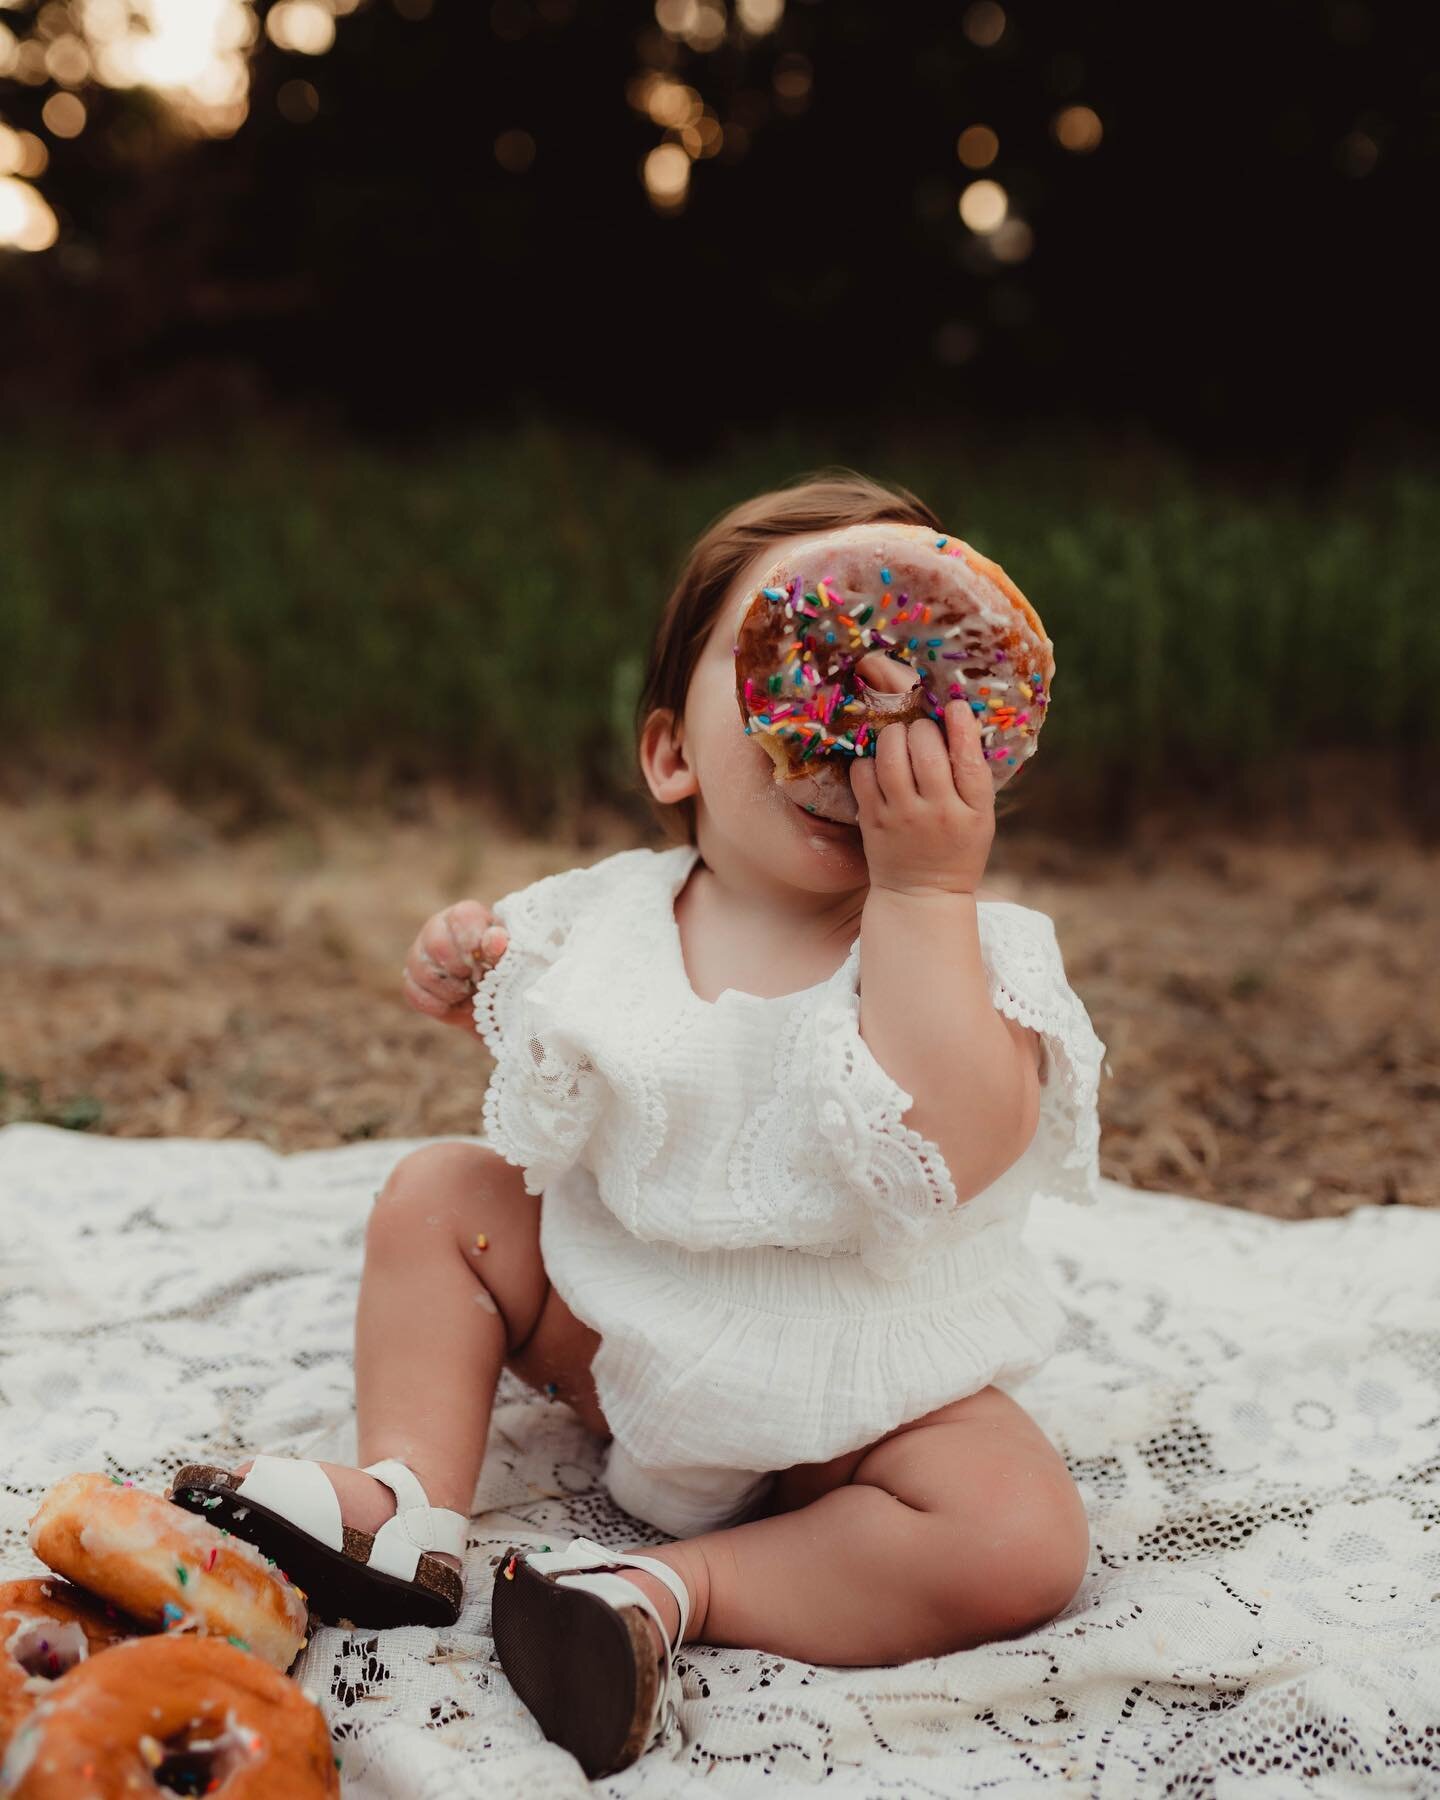 Did someone say donuts? 🍩

This baby girl&rsquo;s fave food is donuts, and I don&rsquo;t have to ask her why. She goes to TOWN on these and her parents knew it would make for the cutest first birthday sesh, so they showed up with a dozen donuts, set